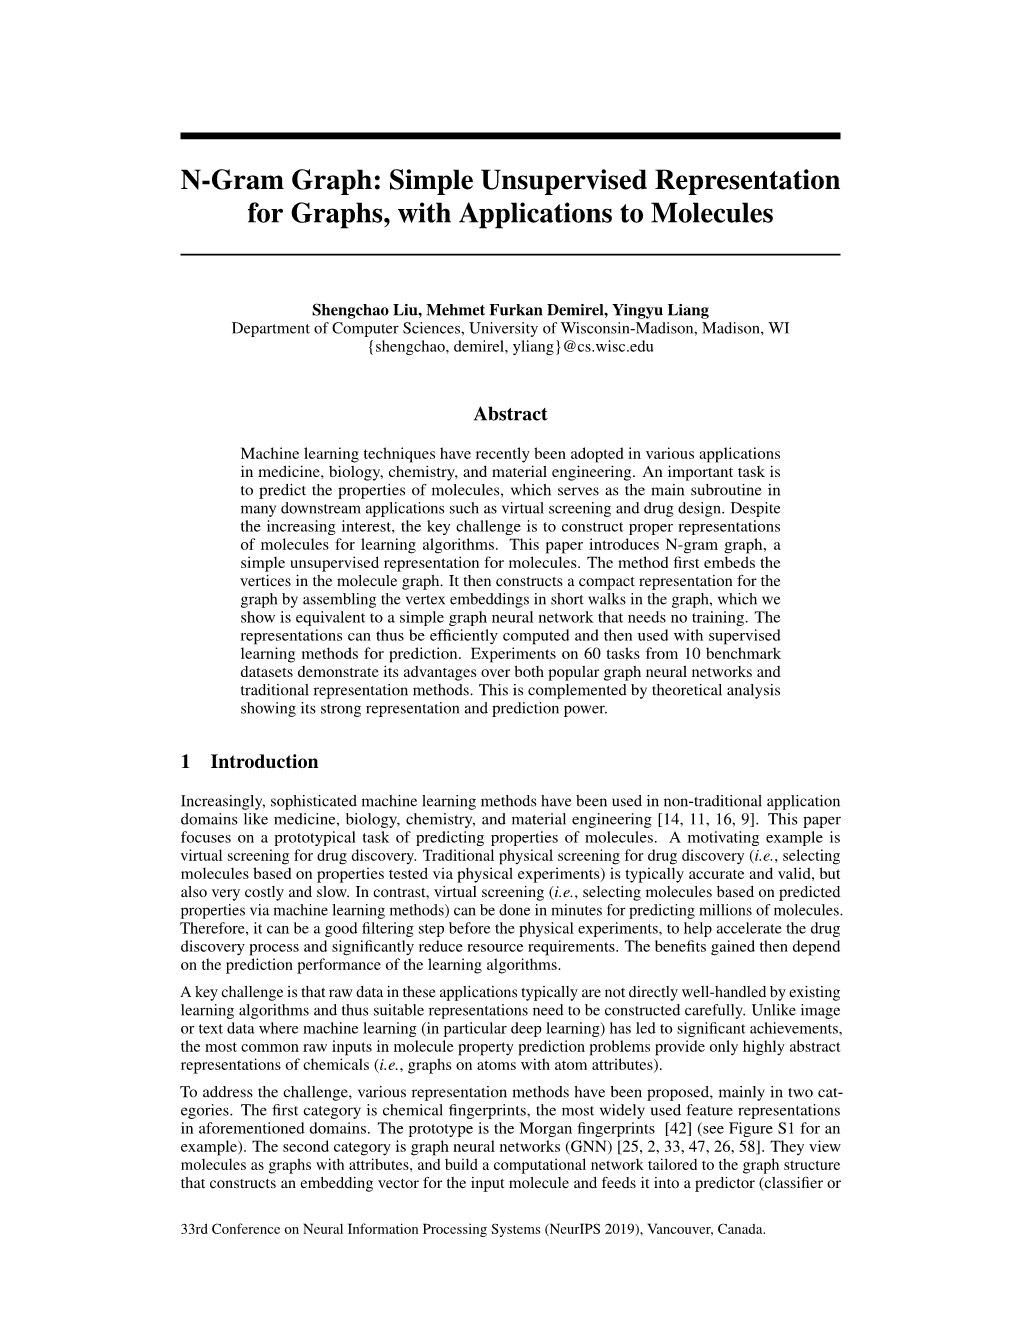 N-Gram Graph: Simple Unsupervised Representation for Graphs, with Applications to Molecules